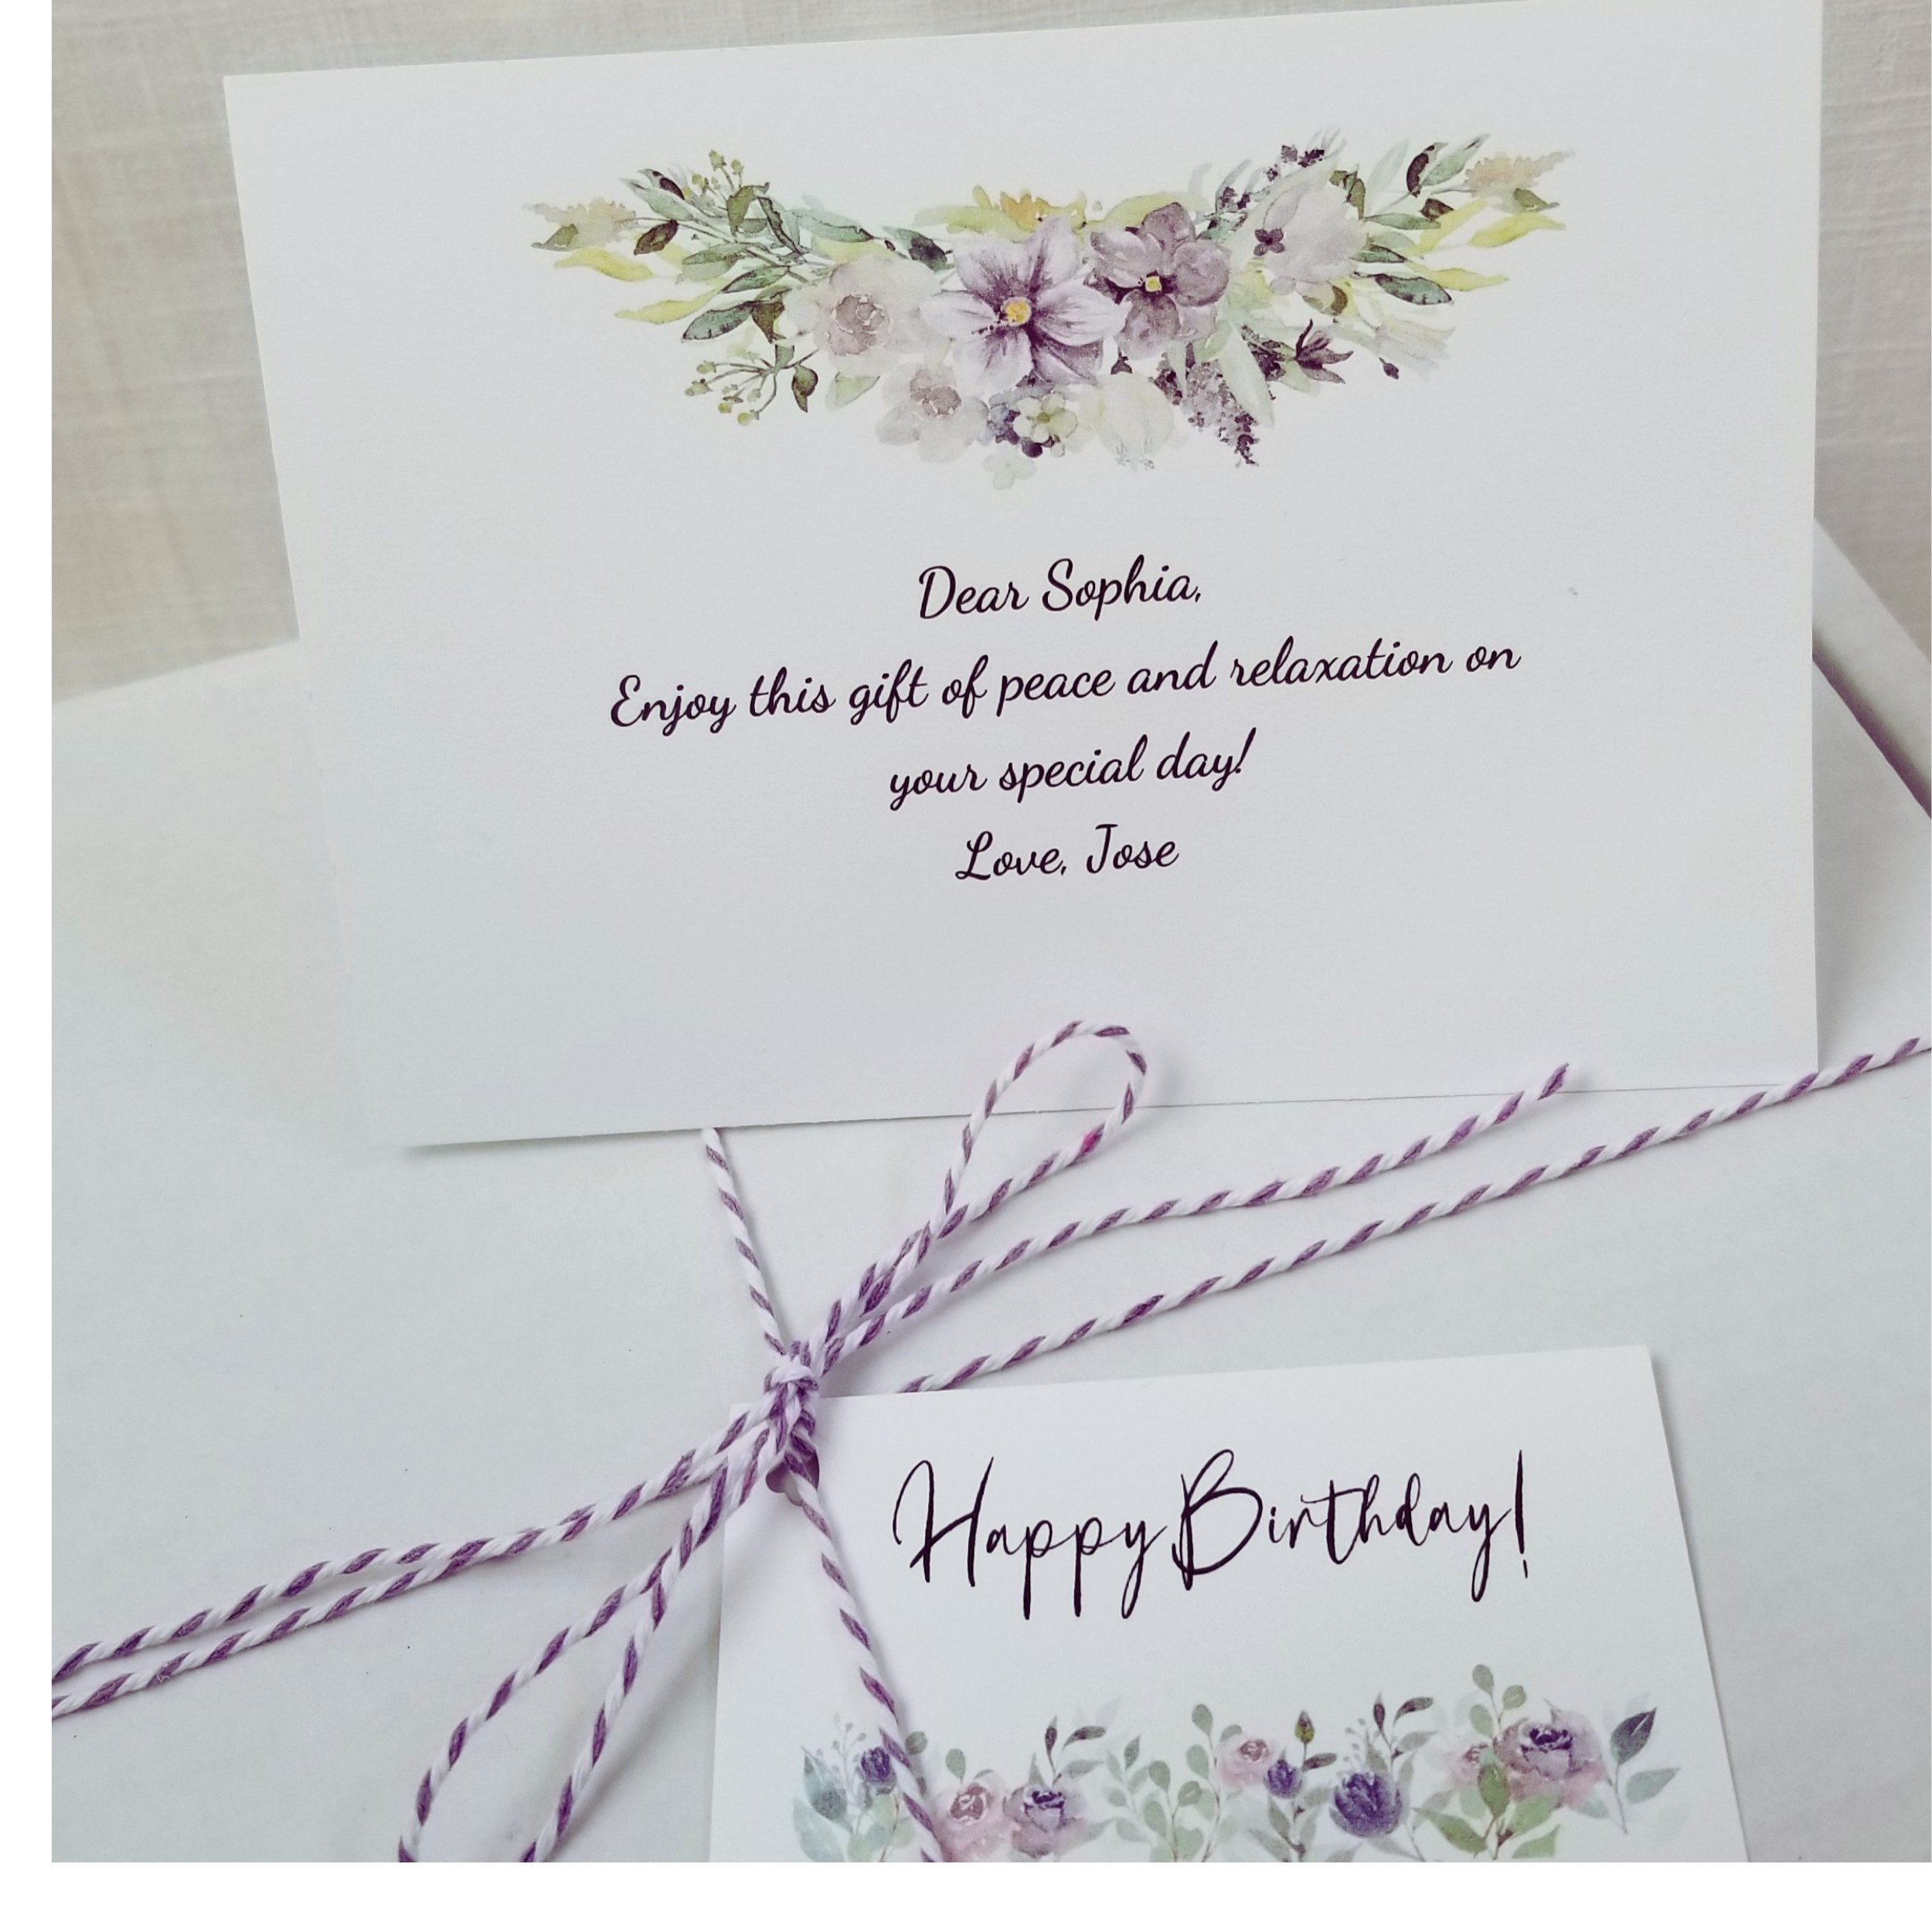 Close up sample language for personalized gift card